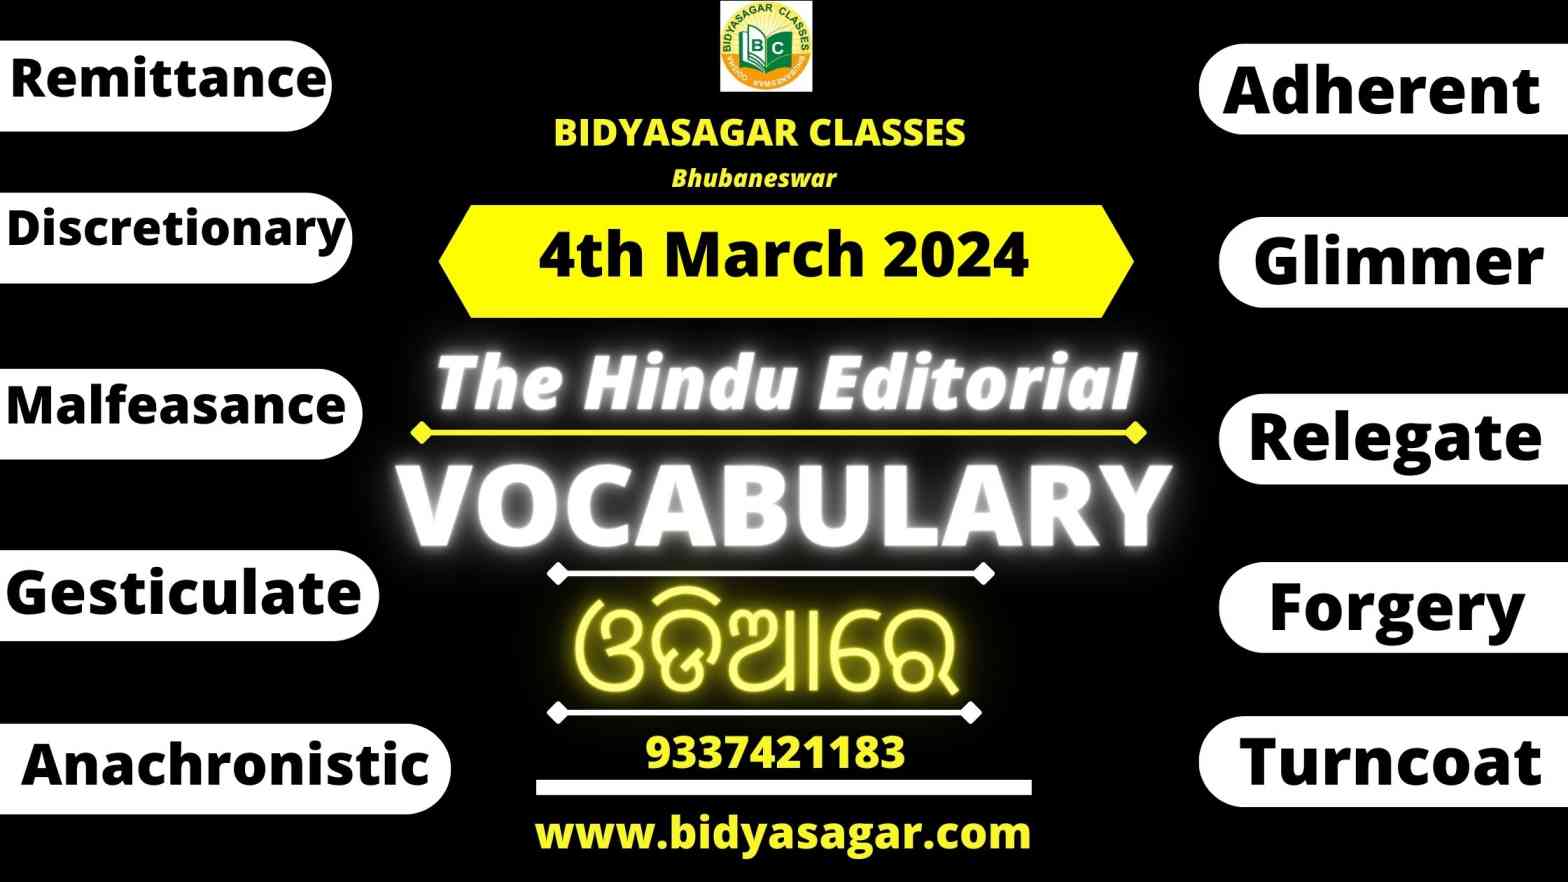 The Hindu Editorial Vocabulary of 4th March 2024